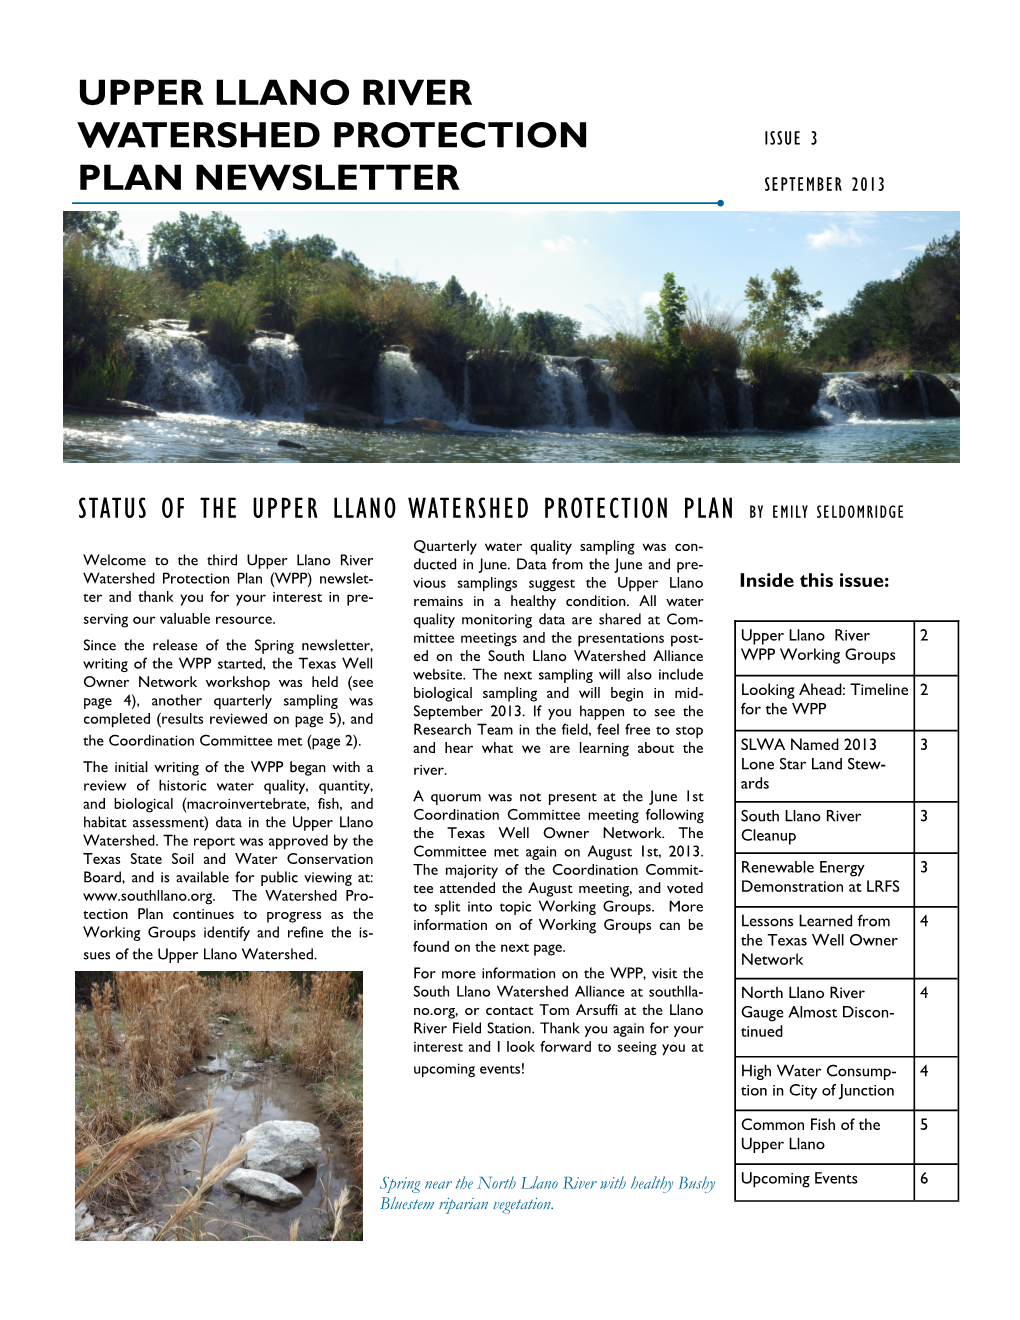 Upper Llano River Watershed Protection Plan Newsletter